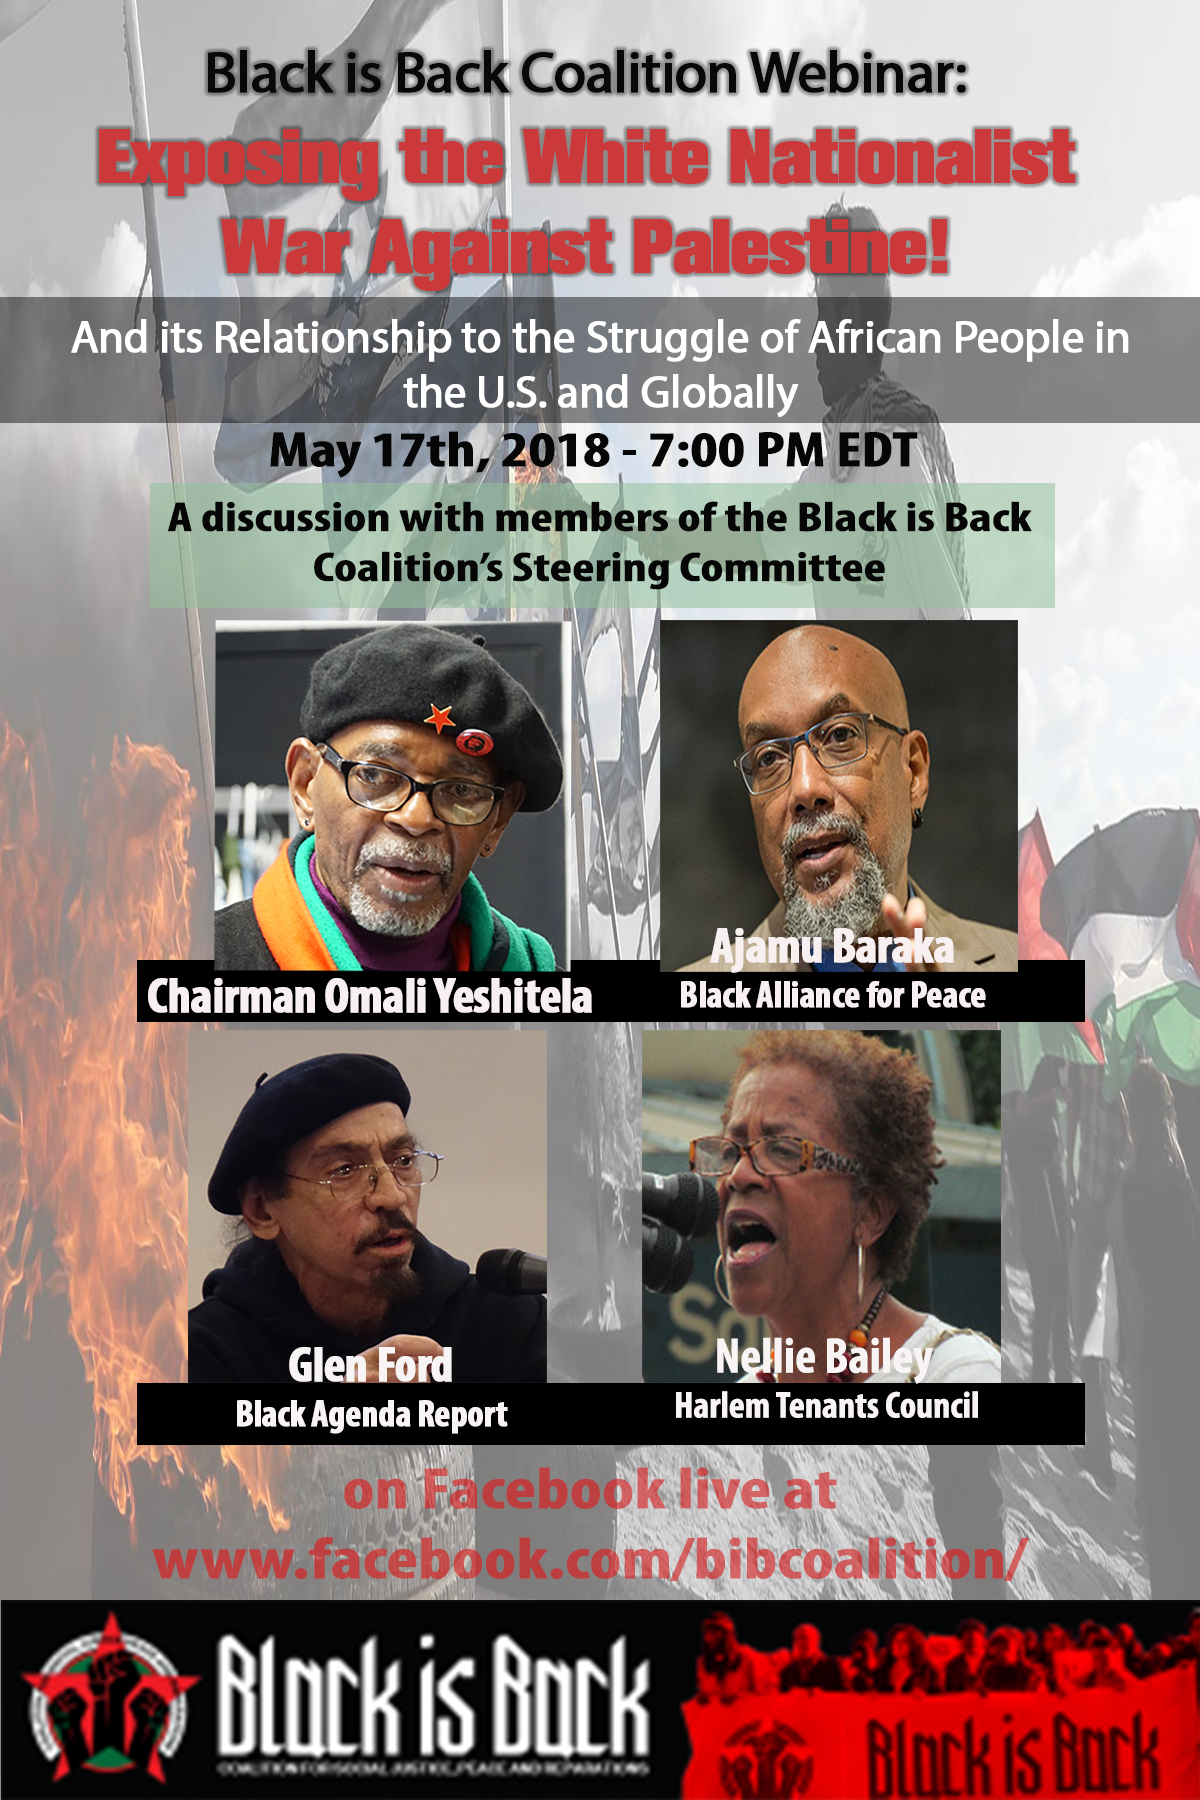 You are currently viewing Members of the BIBC Steering Committee – Chairman Omali Yeshitela, Glen Ford, Ajamu Baraka & Nellie Bailey – lead Facebook Live discussion